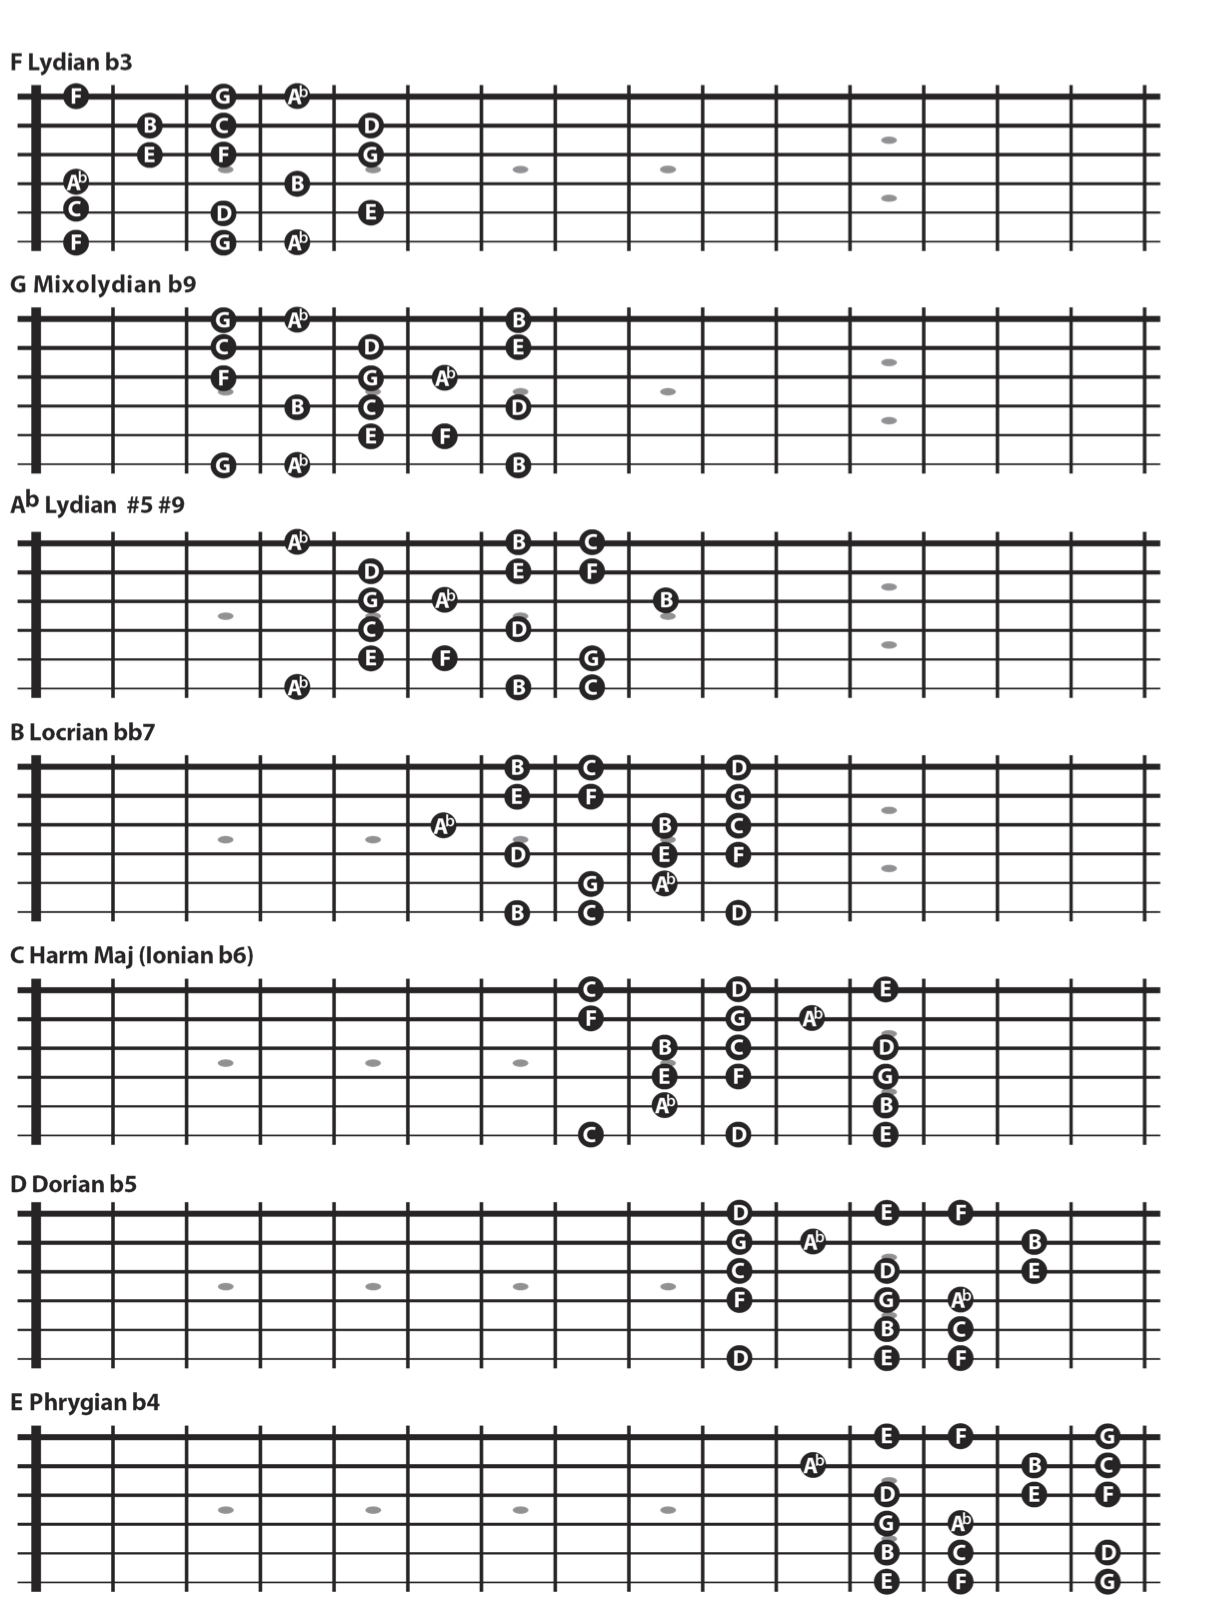 the major scale with b6